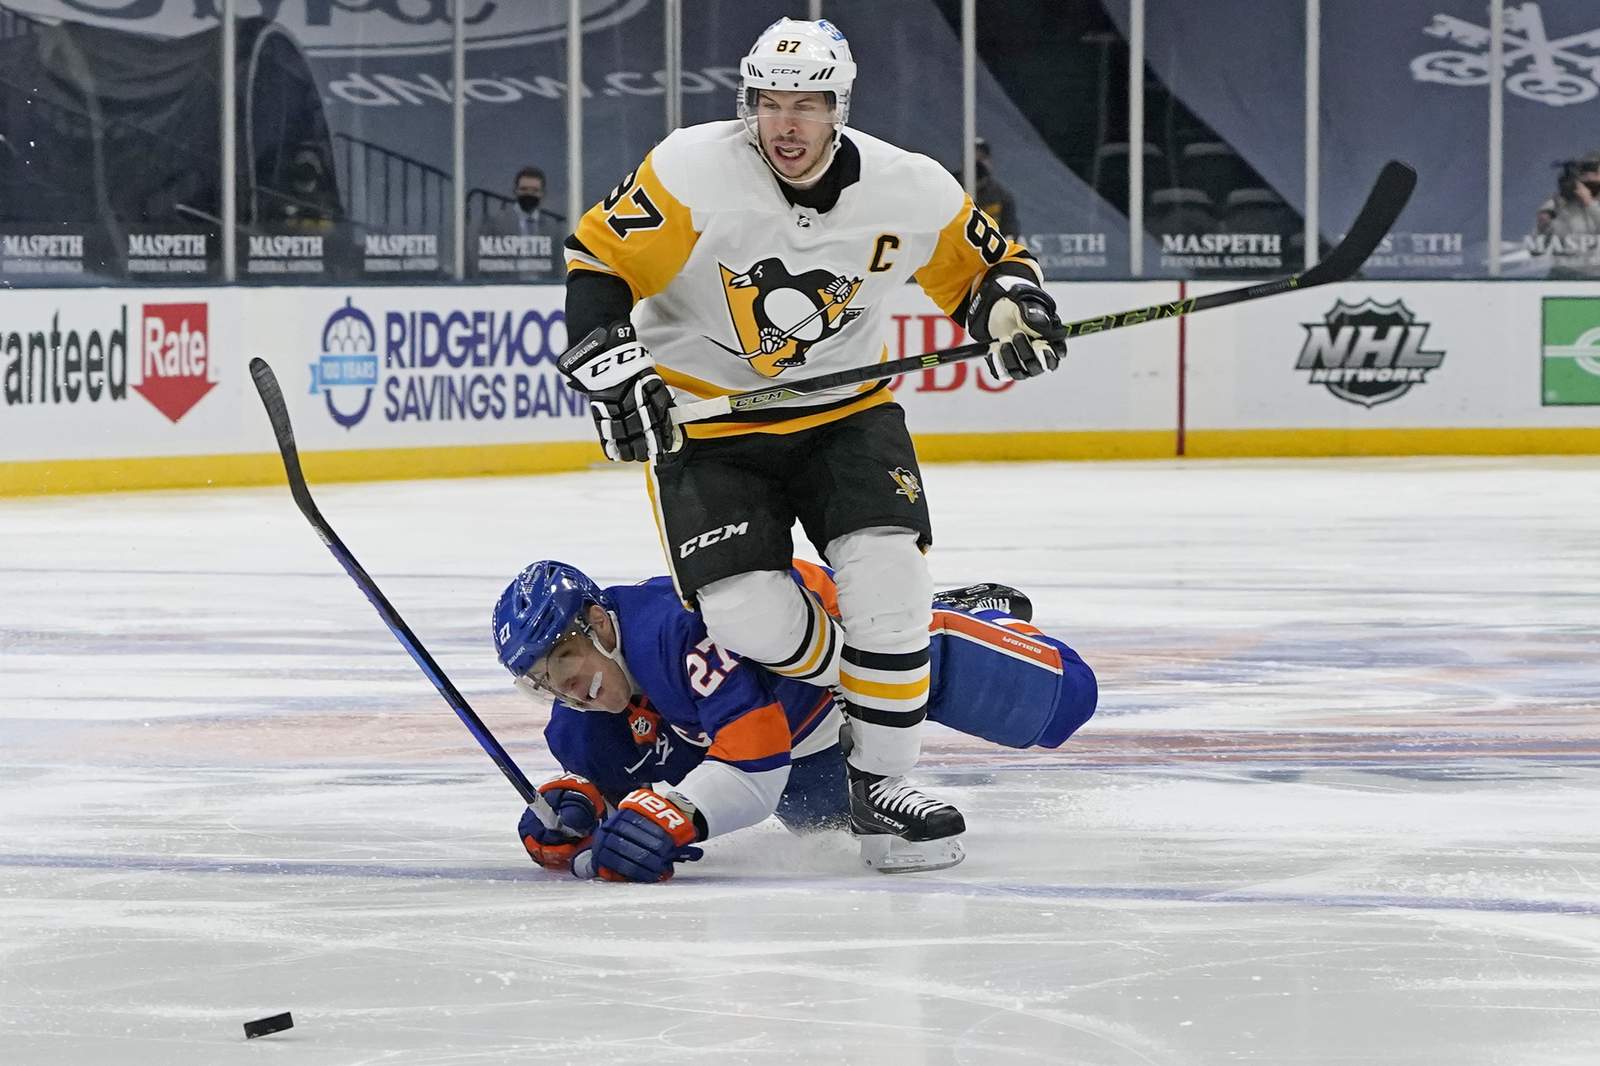 Penguins star Crosby placed on COVID-19 list